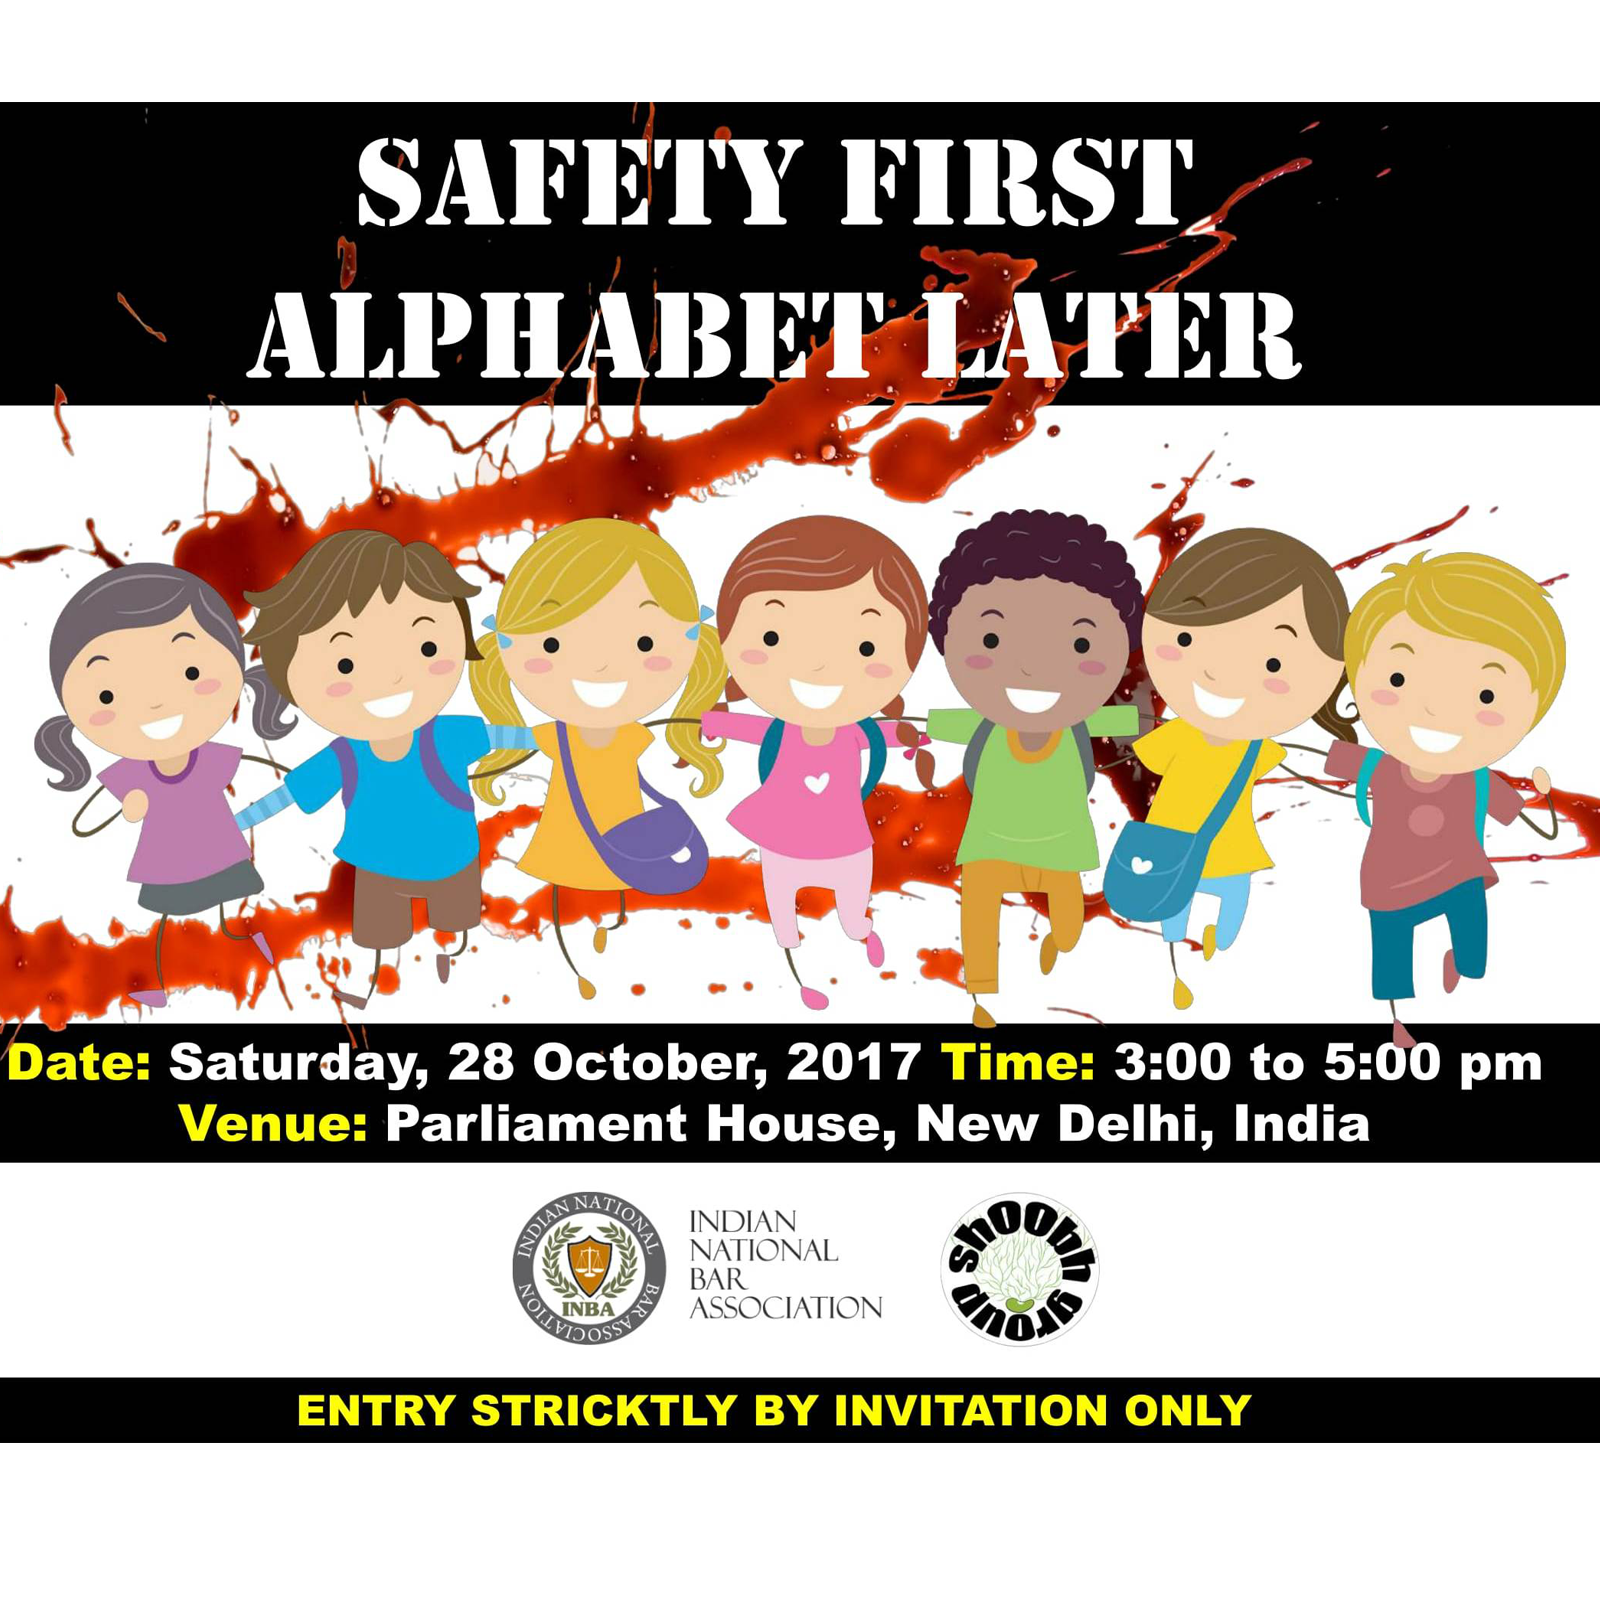 “Safety First, Alphabet later” on October 28, 2017, 3:00 pm at The Parliament House, New Delhi, India